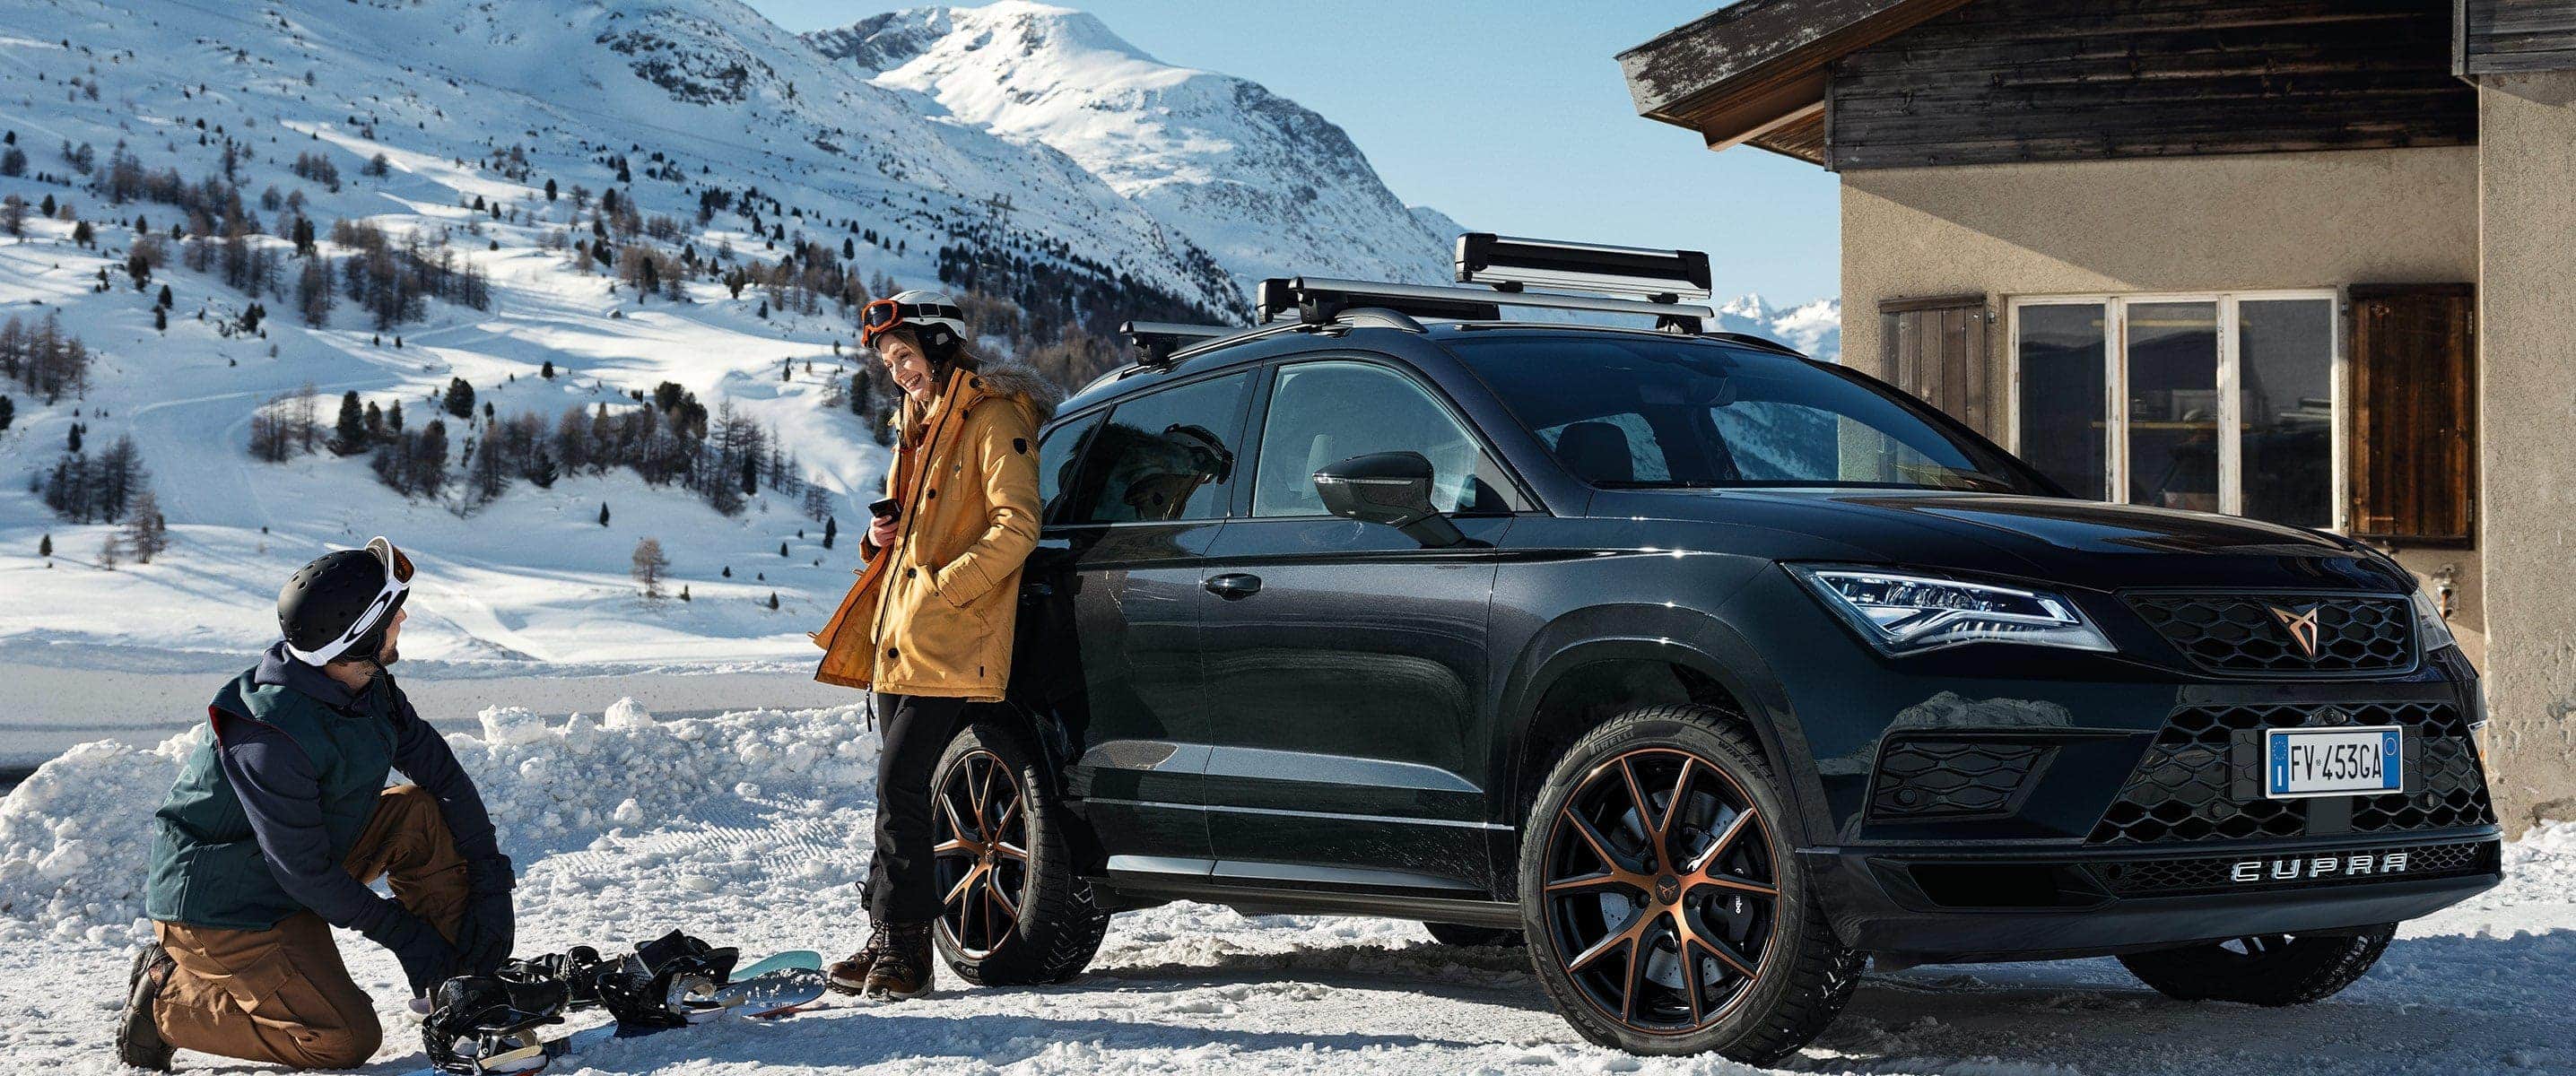 cupra-ateca-with-couple-in-the-snow